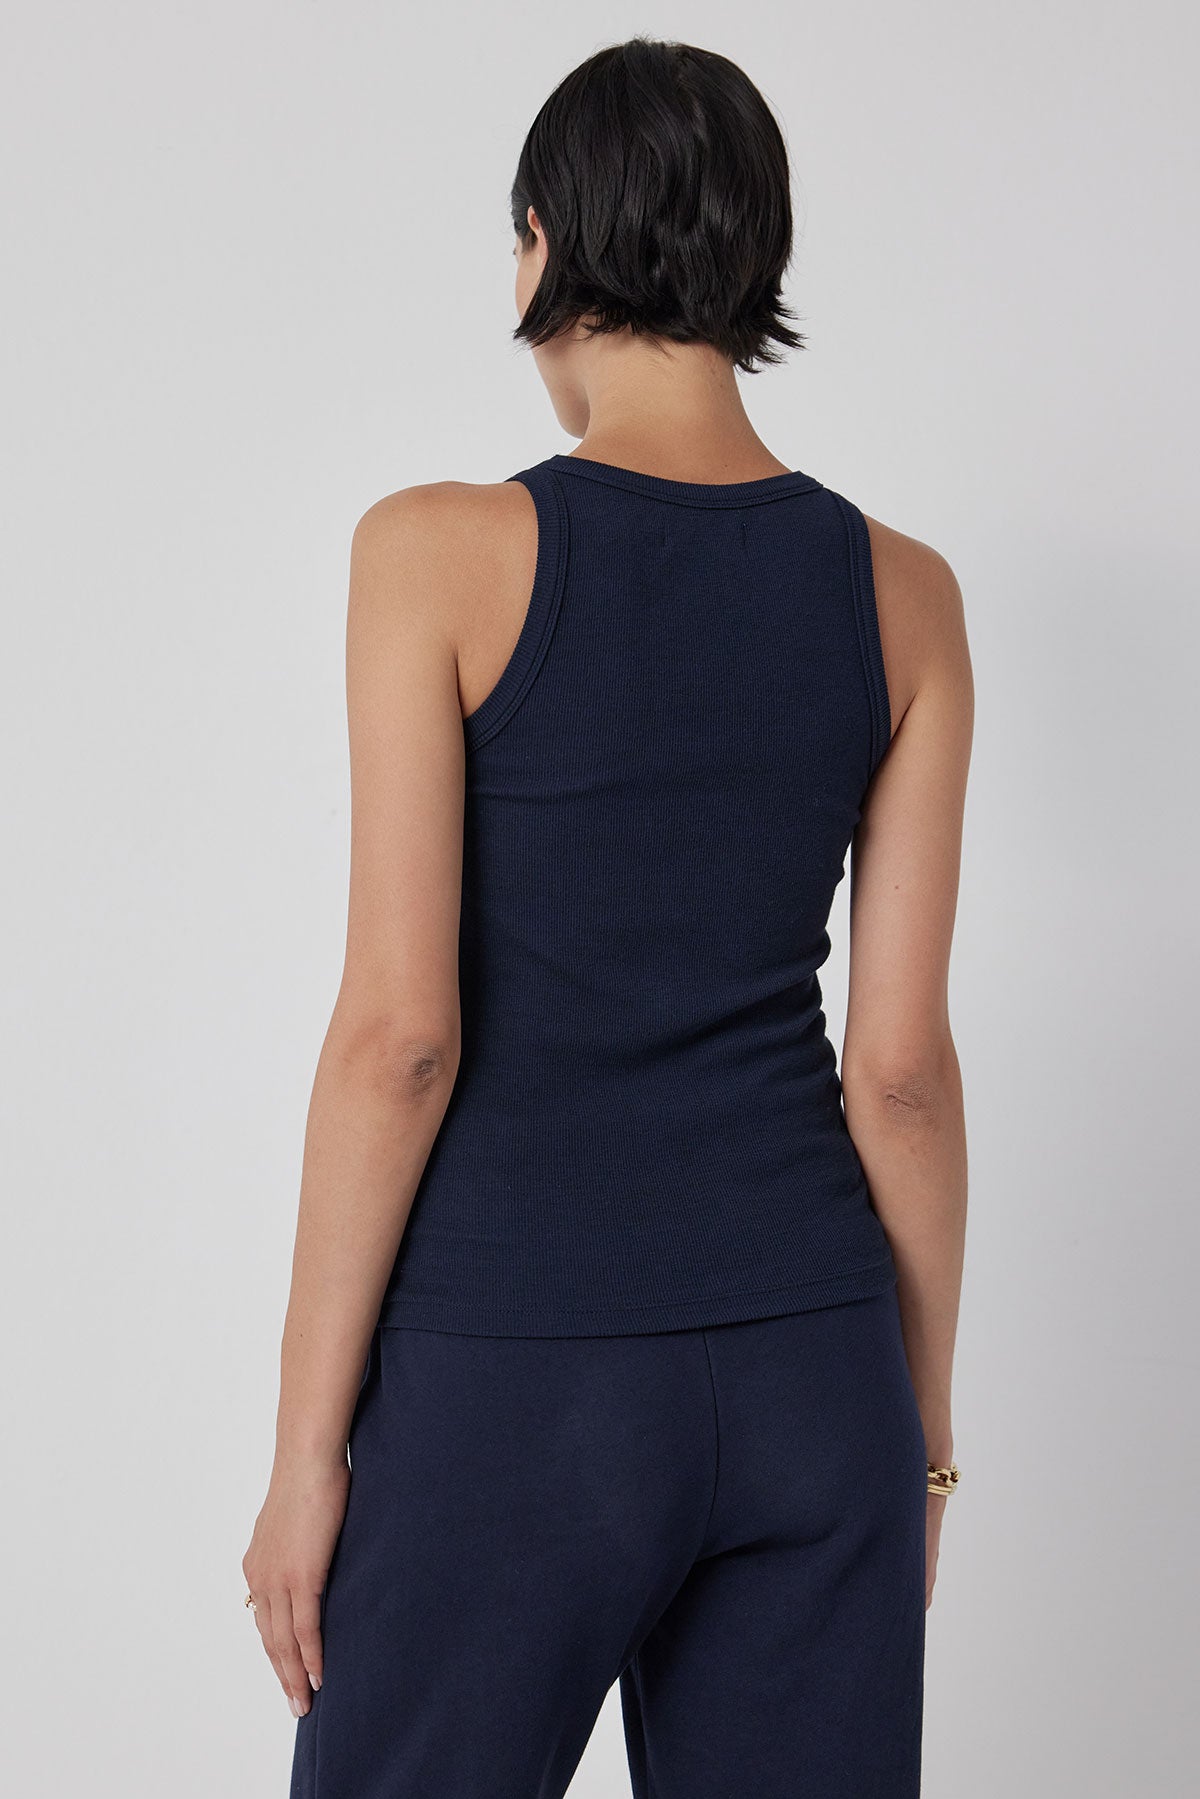 The back view of a woman wearing navy stretch pants and a Velvet by Jenny Graham CRUZ tank top.-36212441219265